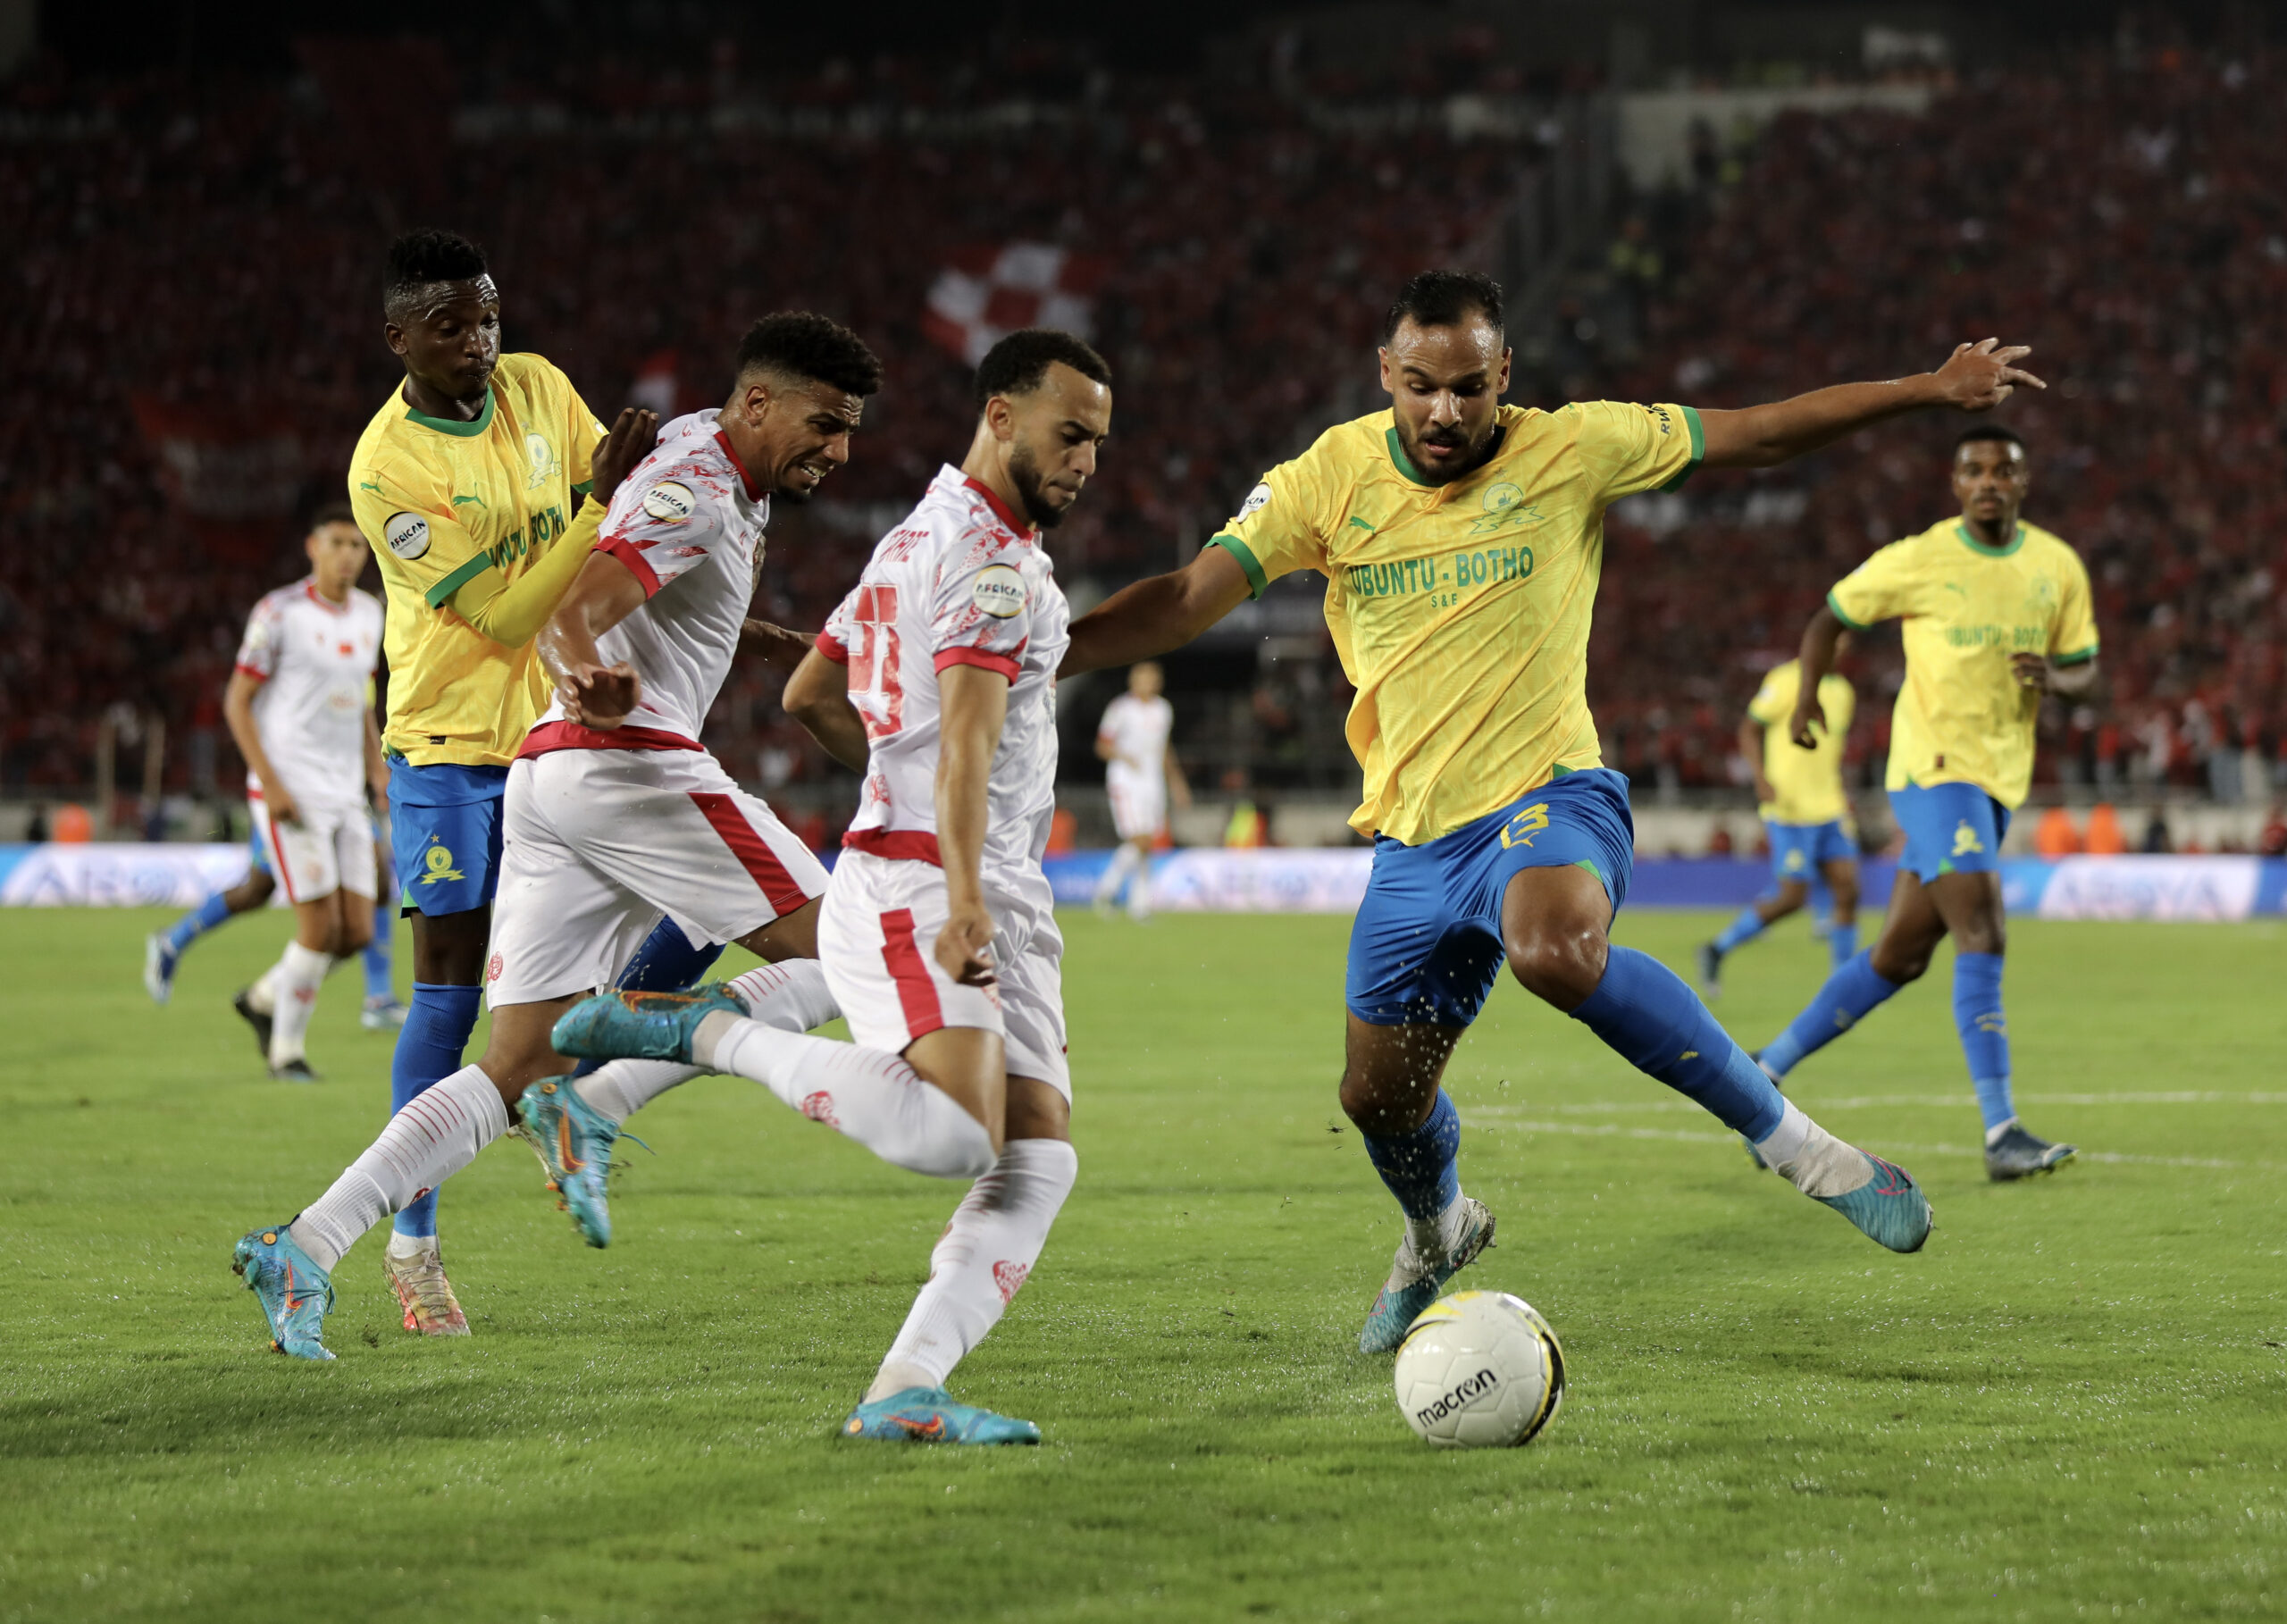 Hicham Boussefiane of Wydad challenges Abdelmounaim Boutouil of Mamelodi Sundowns during the 2023 African Football League final between Wydad Casablanca and Mamelodi Sundowns in Mohammed V Stadium in Casablanca, Morocco on 5 November 2023 ©Nour Aknajja/BackpagePix